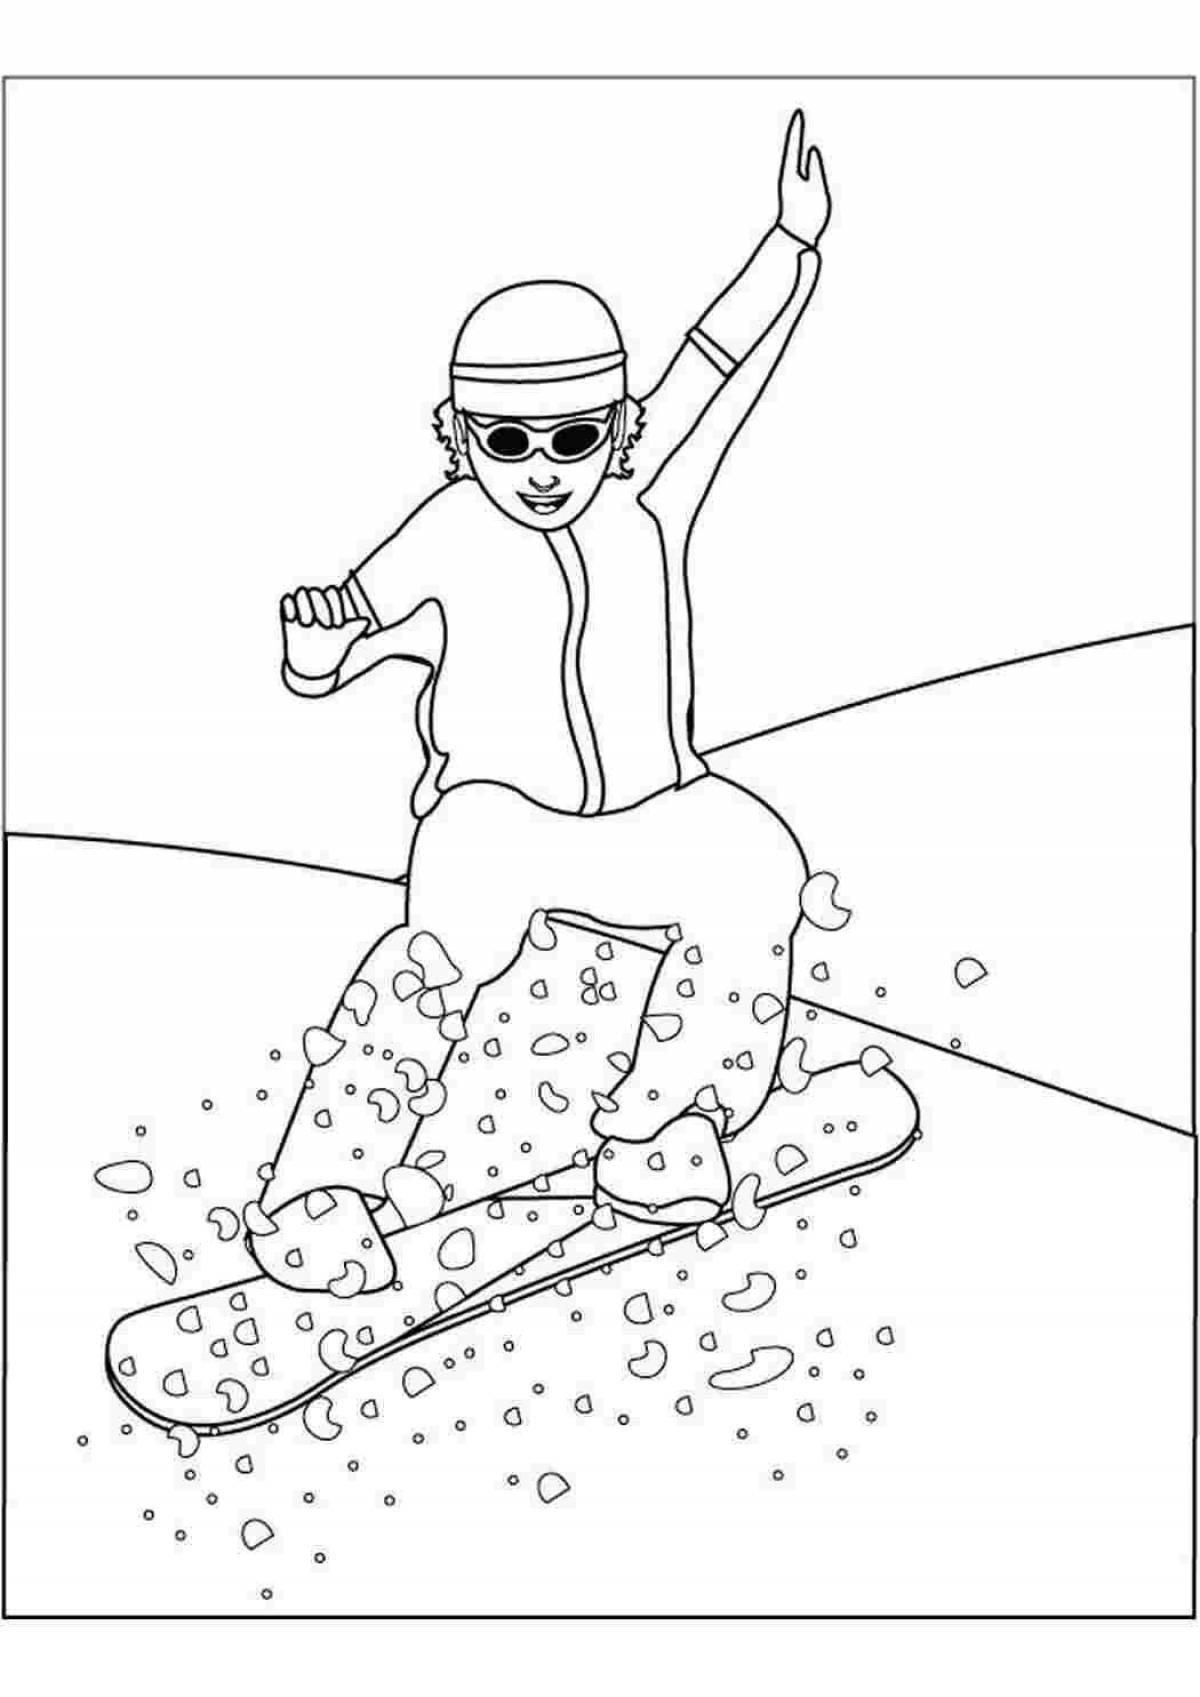 Dynamic winter sports coloring page